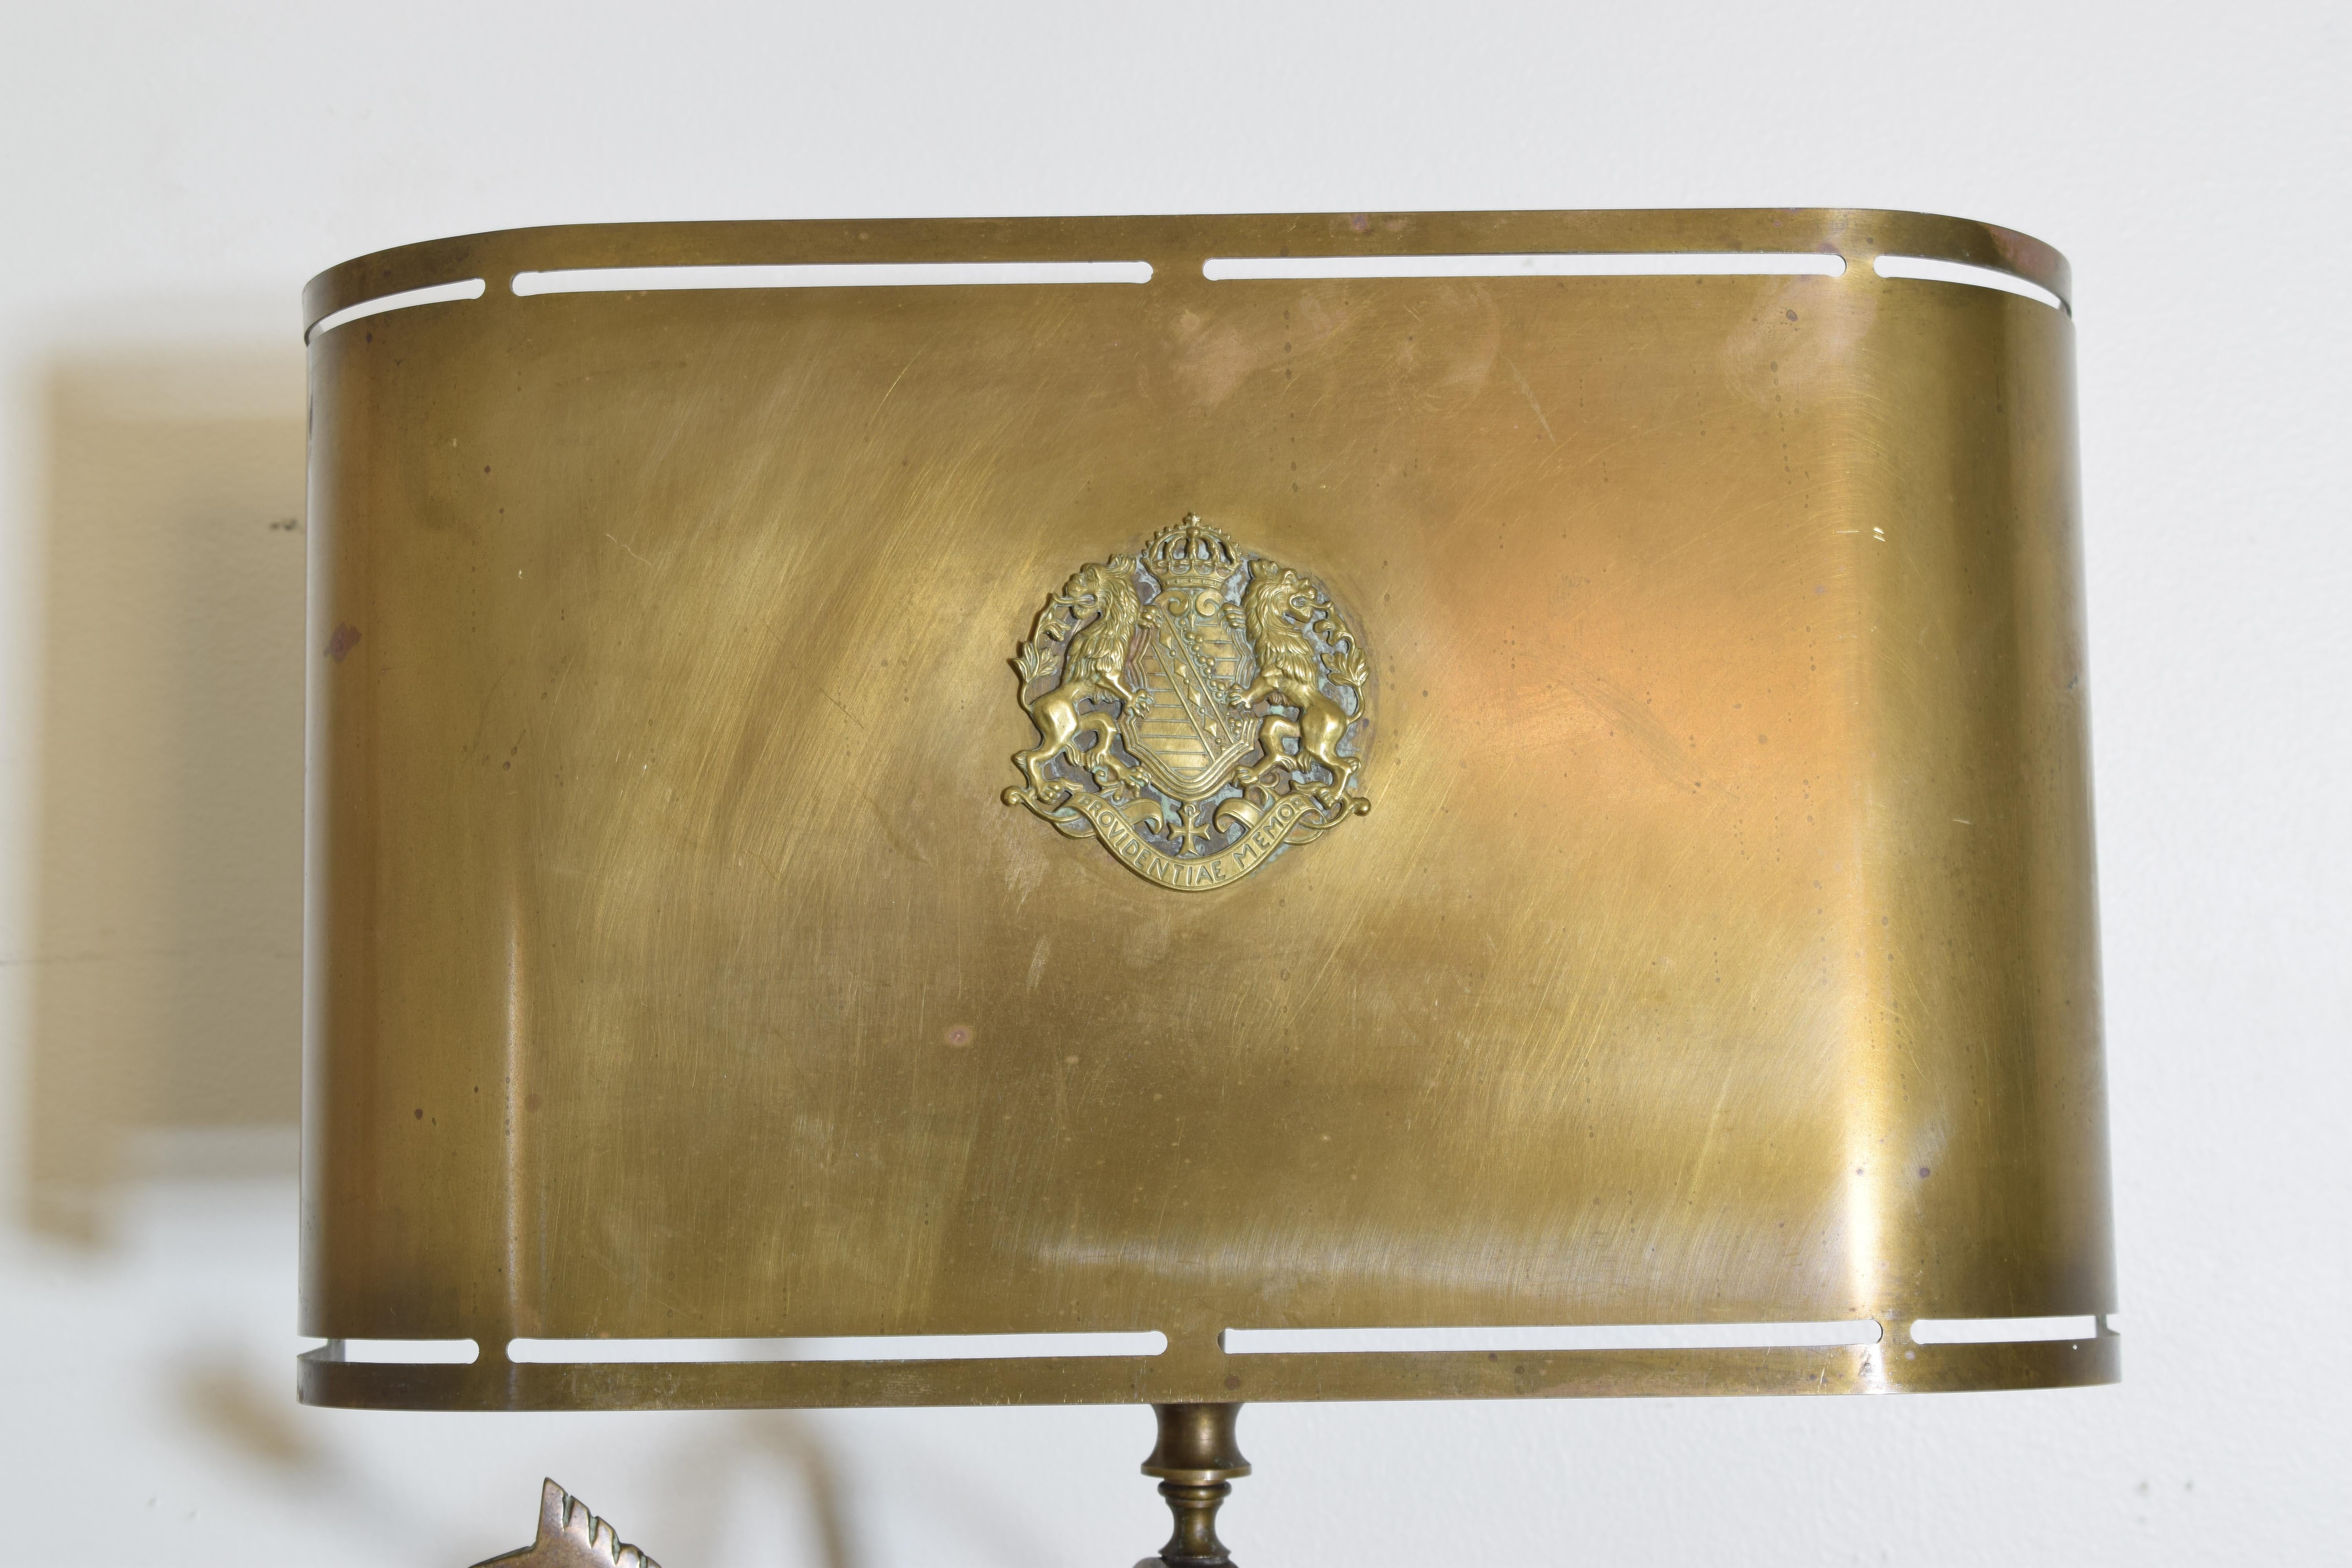 Early 20th Century Sundial Lamp with a Heraldic Coat of Arms Brass Shade For Sale 1